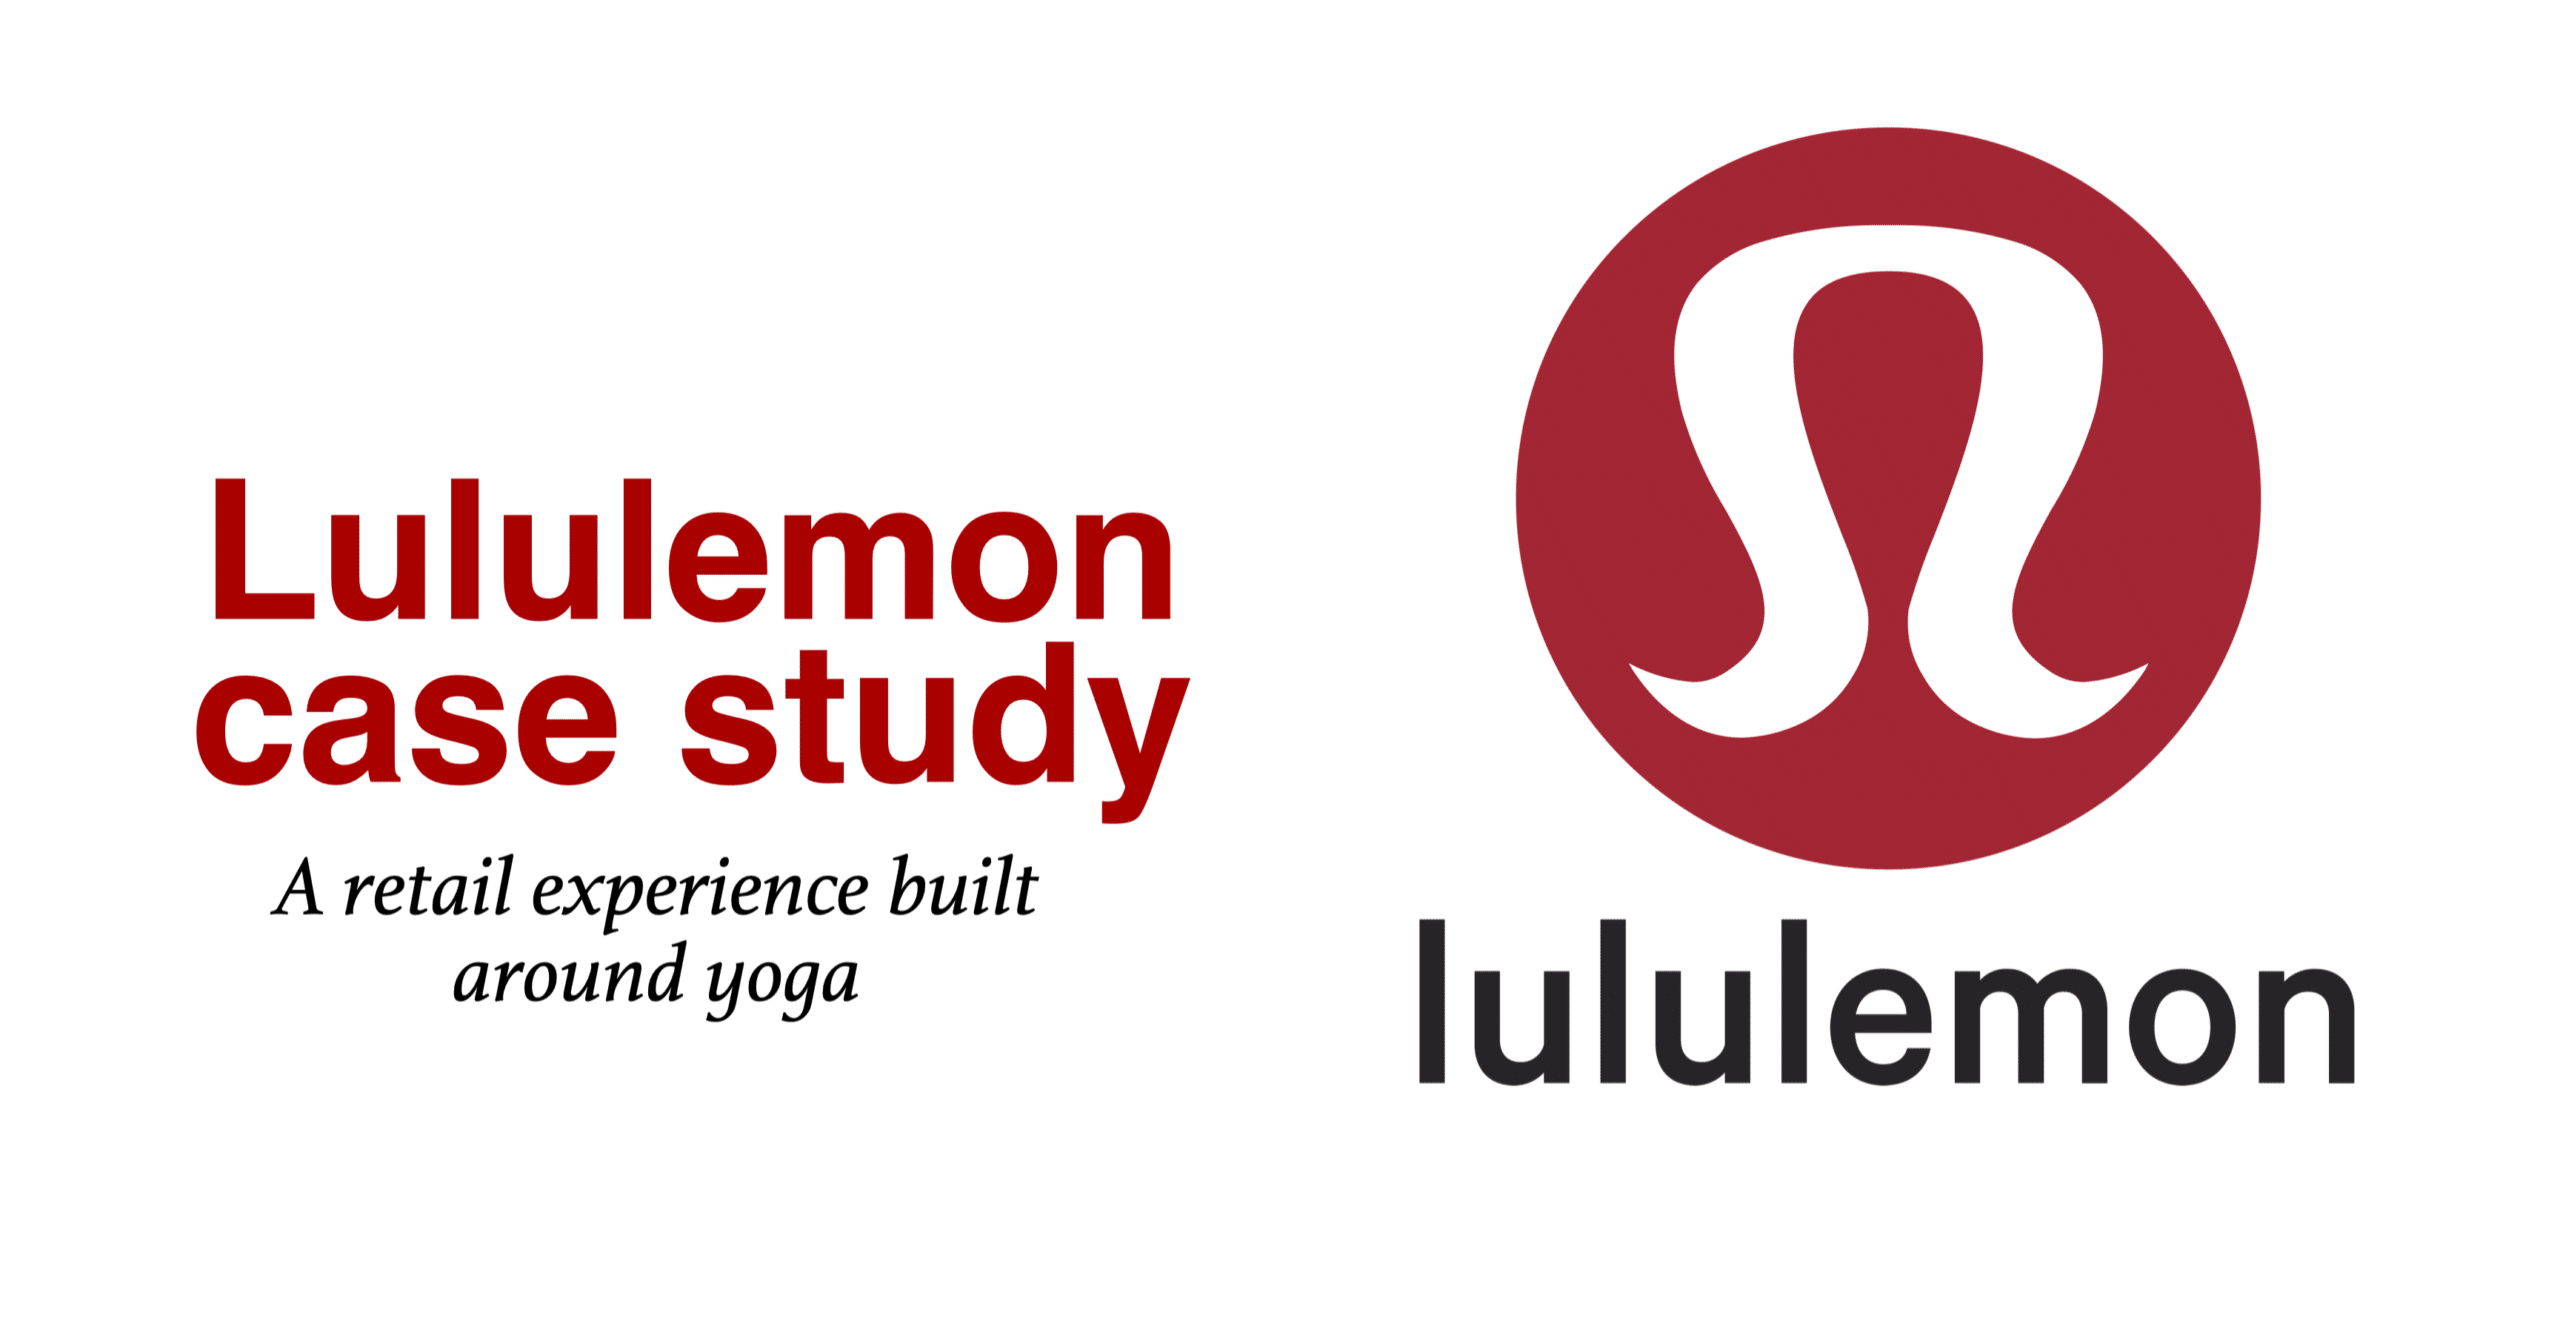 What makes Lululemon's supply chain strategy so great?